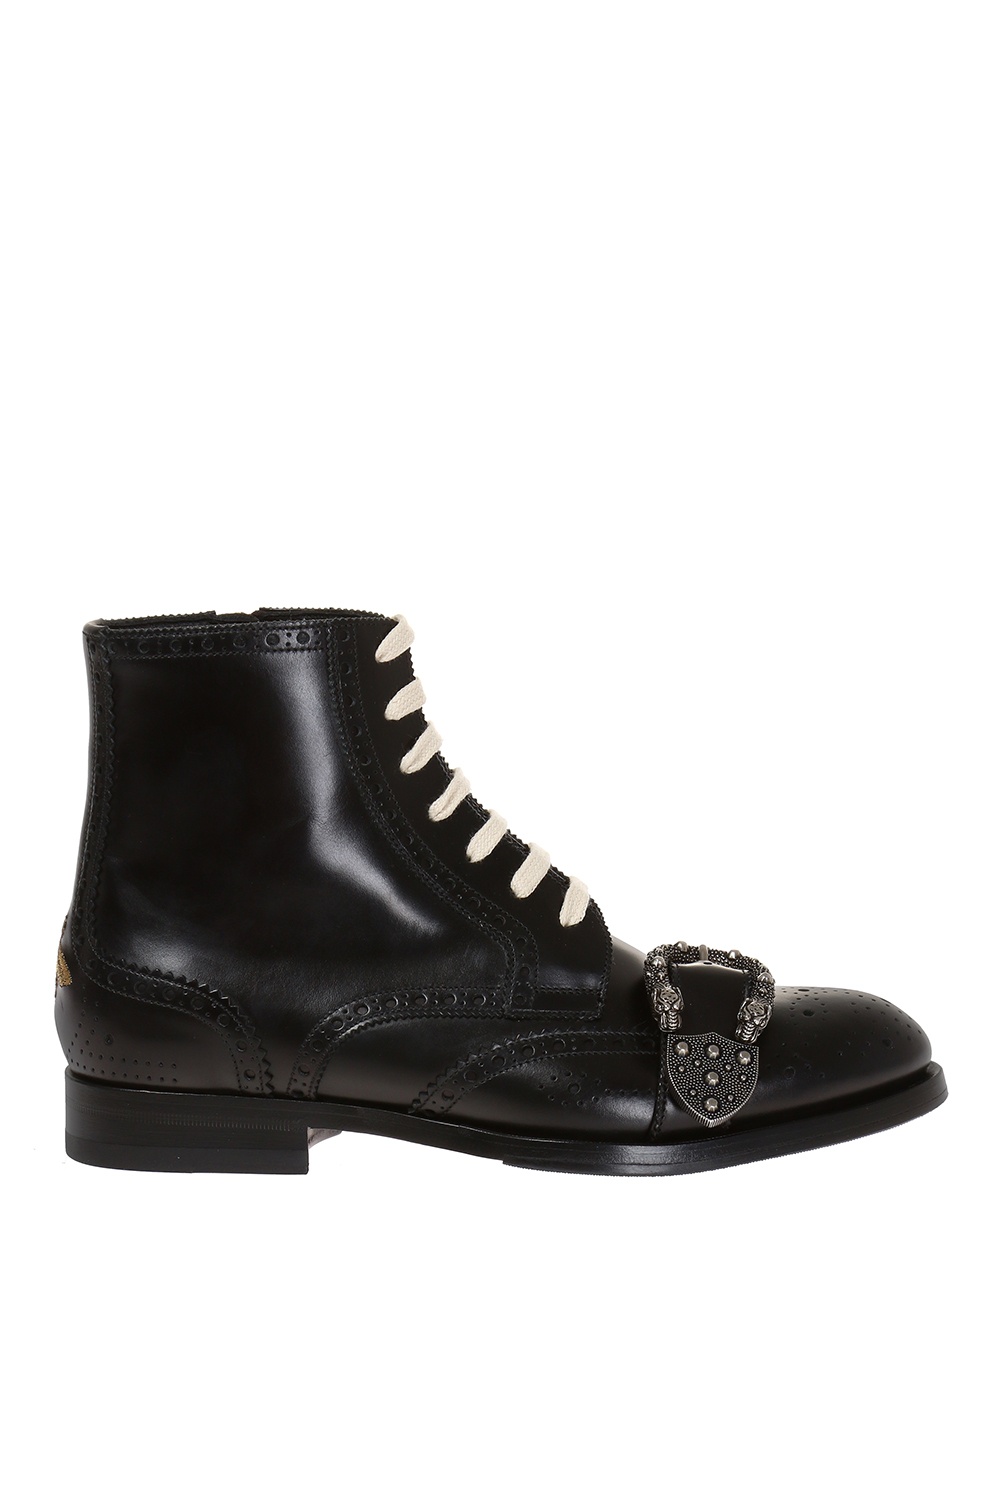 gucci queercore boots